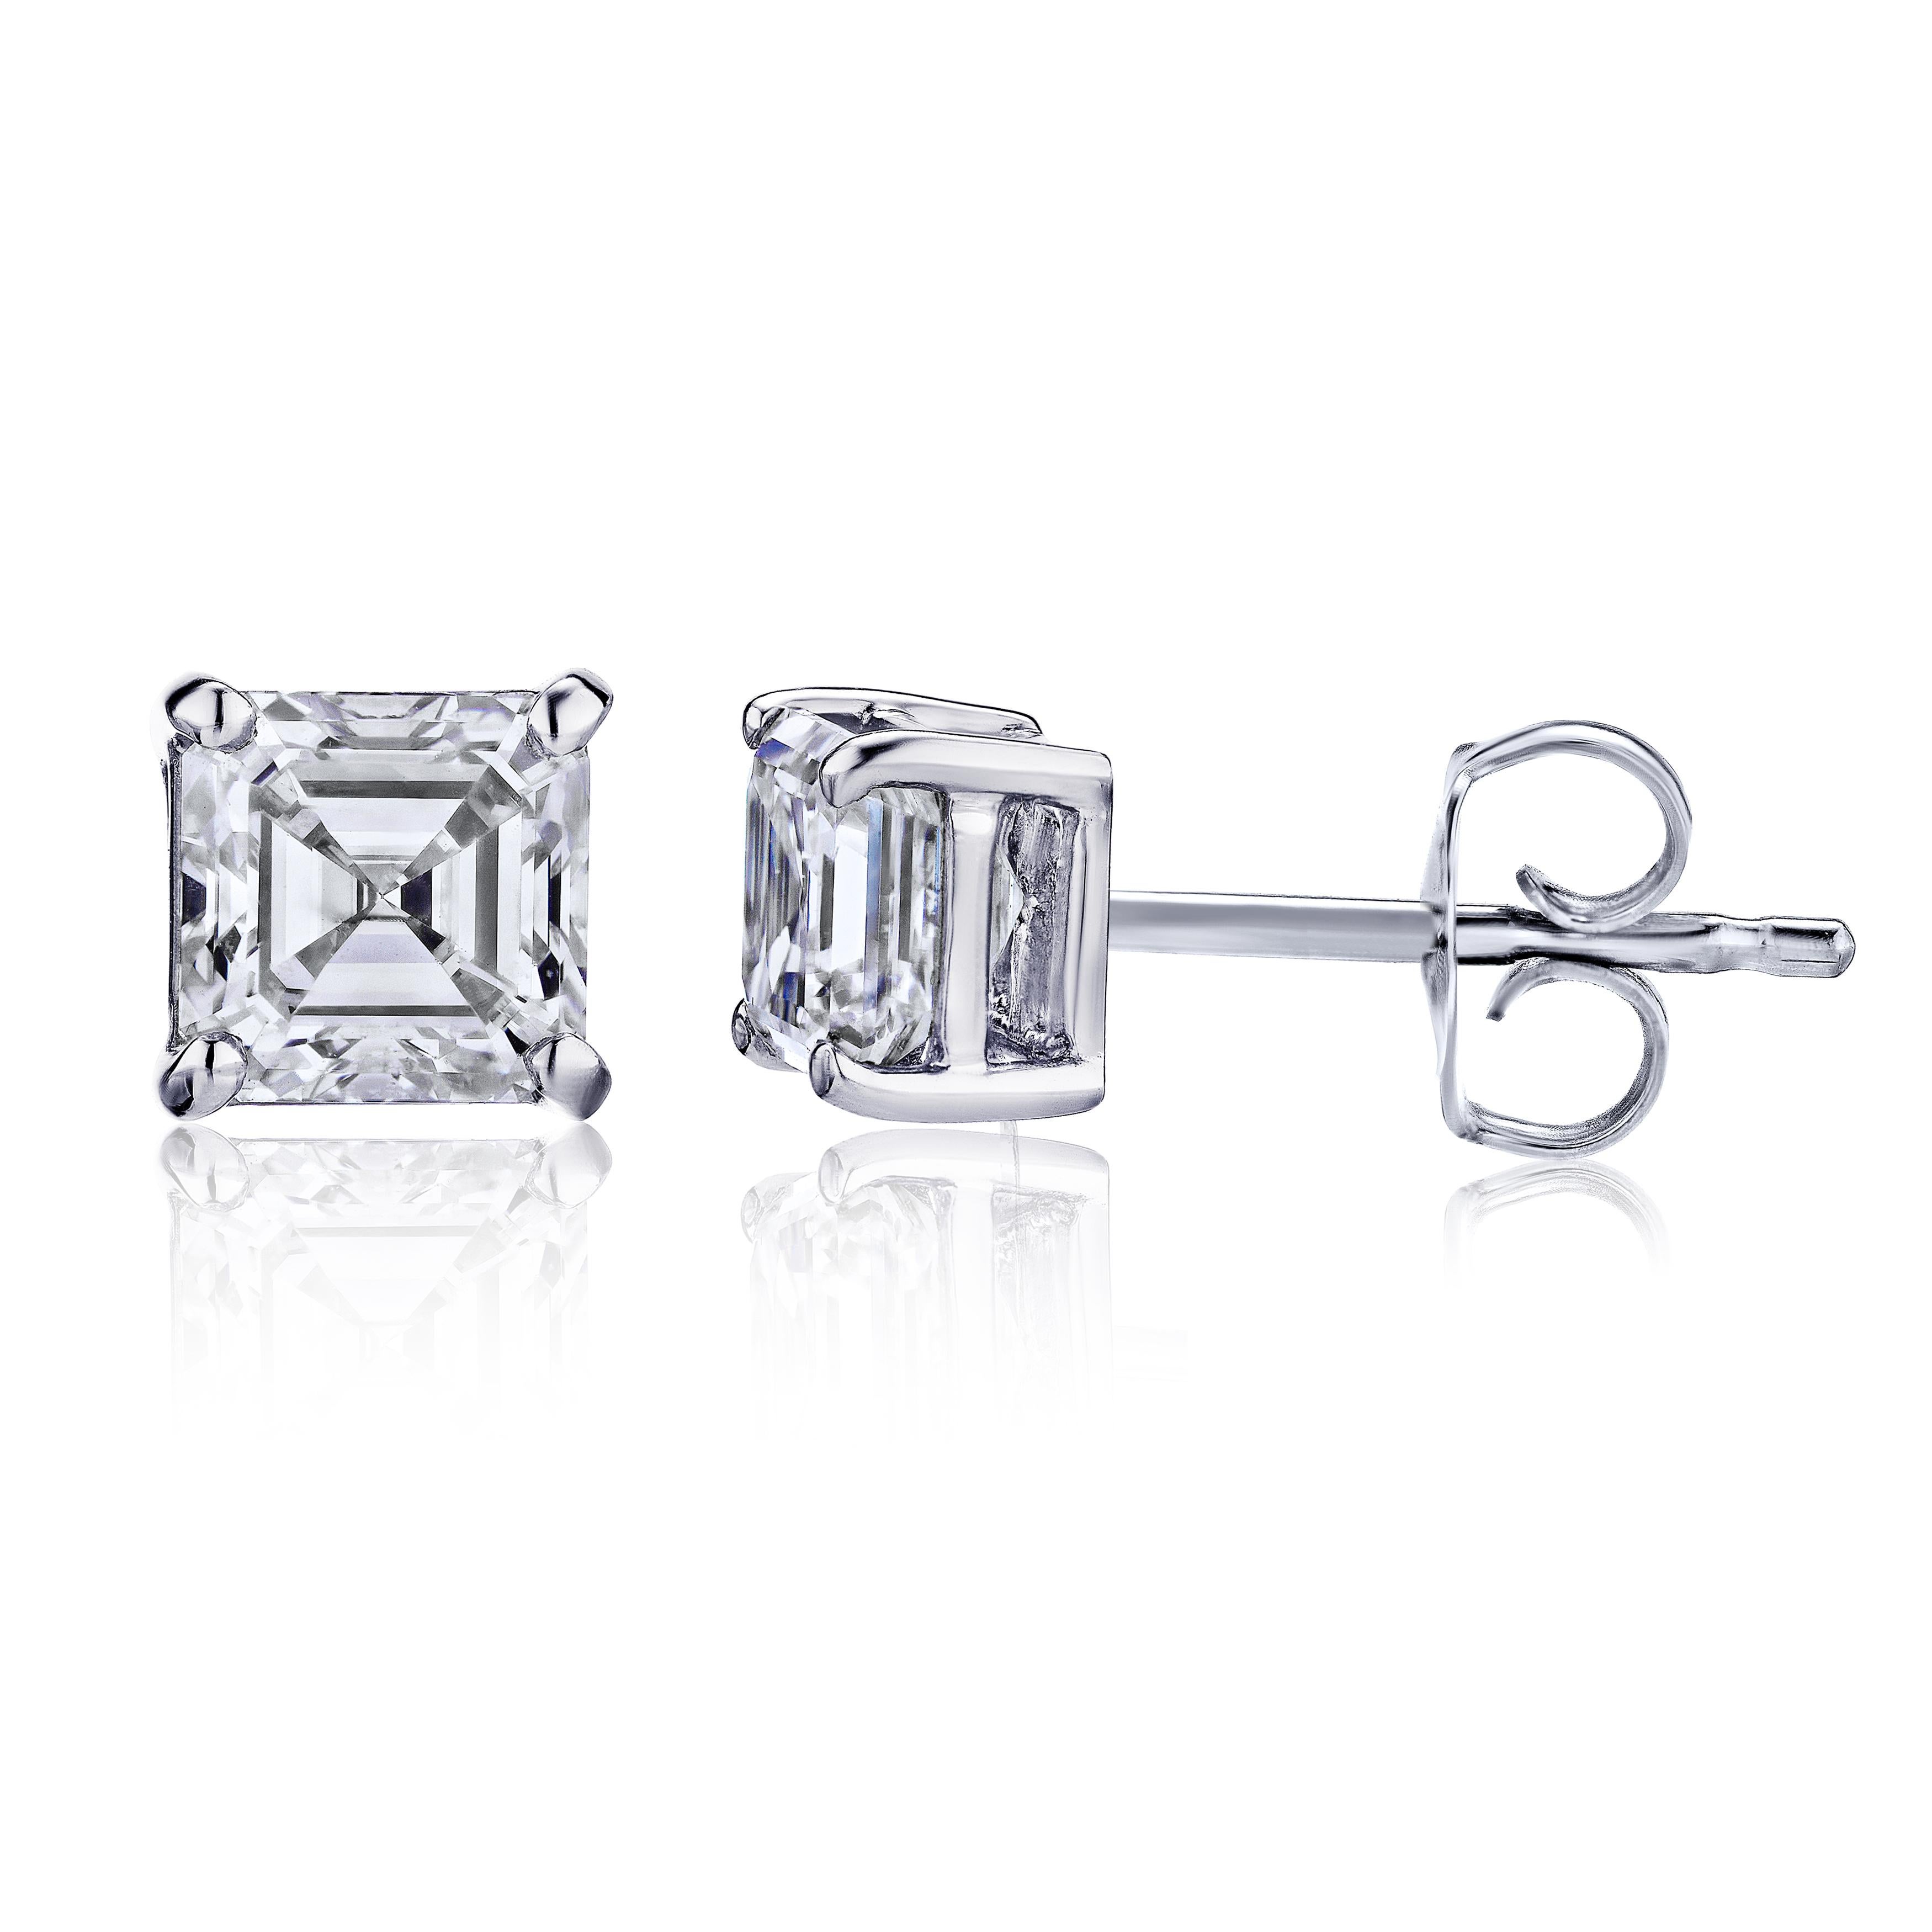 3/4 CT diamonds set in low basket 4 prong push back style. GIA certificates for each diamond. 1 diamond D VS2 0.39 cts . 
2 diamond D VS1 0.40 cts . Total both diamonds 0.79 carats. 
Lab tested guarantee all NATURAL mined diamonds. 

Available in